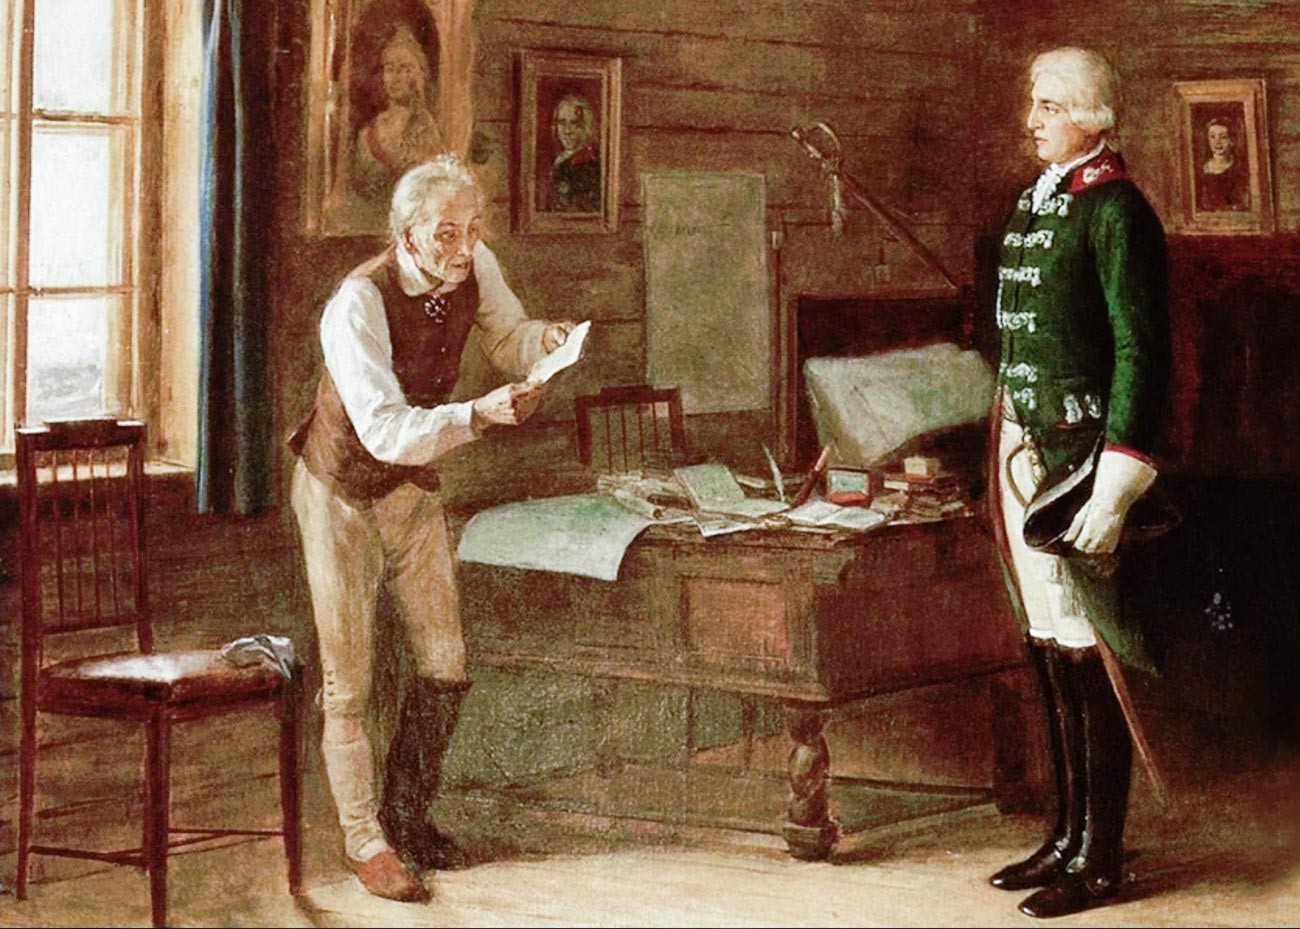 An exiled Suvorov receiving orders to lead the Russian Army against Napoleon